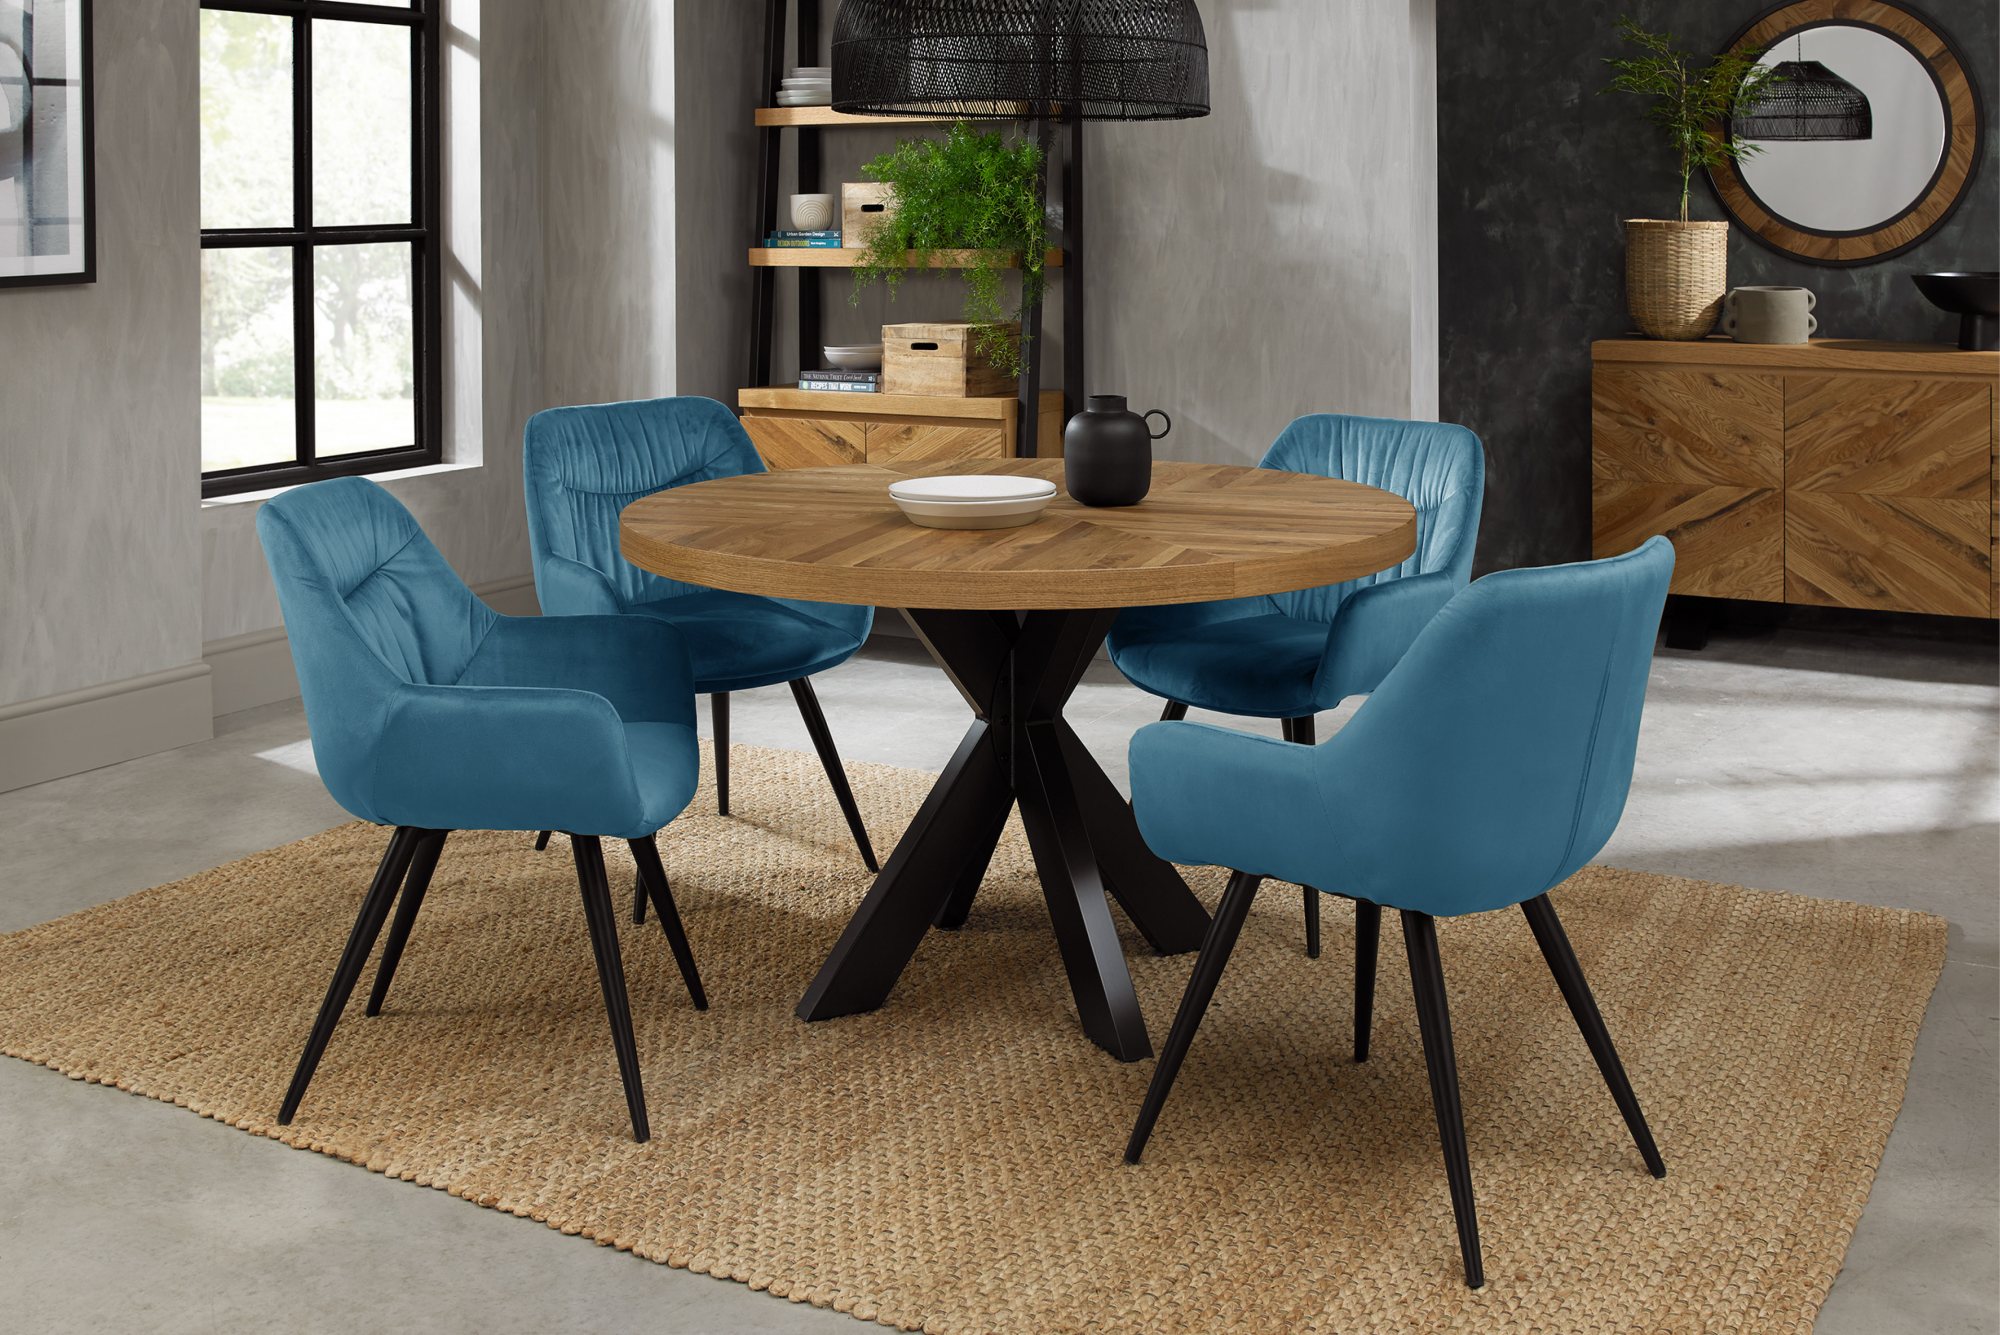 Home Origins Bosco Rustic Oak 4 seater dining table with 4 Dali chairs- petrol blue velvet fabric